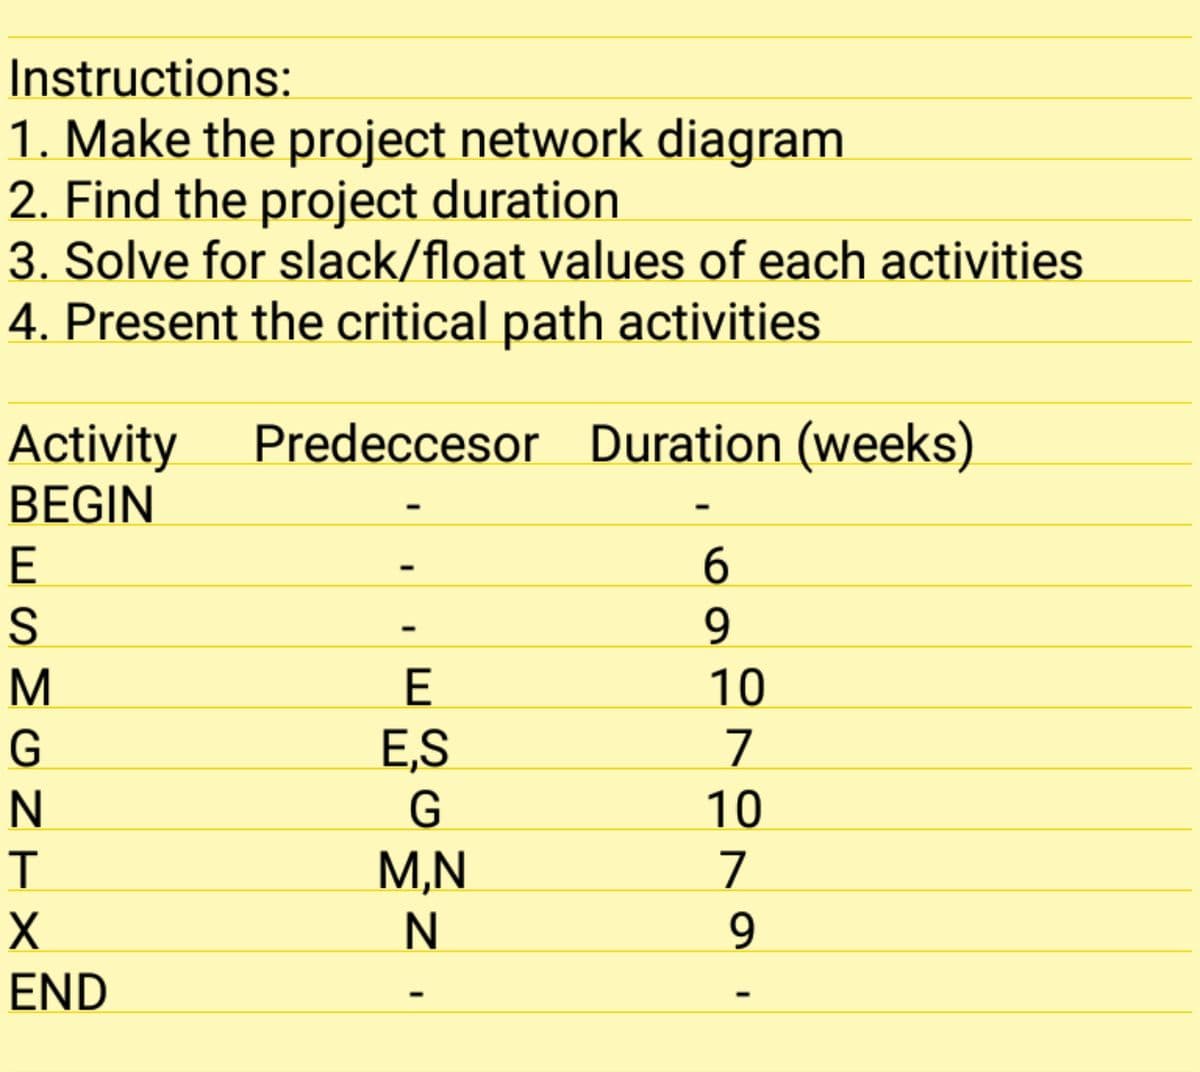 Instructions:
1. Make the project network diagram
2. Find the project duration
3. Solve for slack/float values of each activities
4. Present the critical path activities
Predeccesor Duration (weeks)
Activity
BEGIN
E
6.
9.
M
10
G
E,S
N
G
10
T.
M,N
7
N
END
